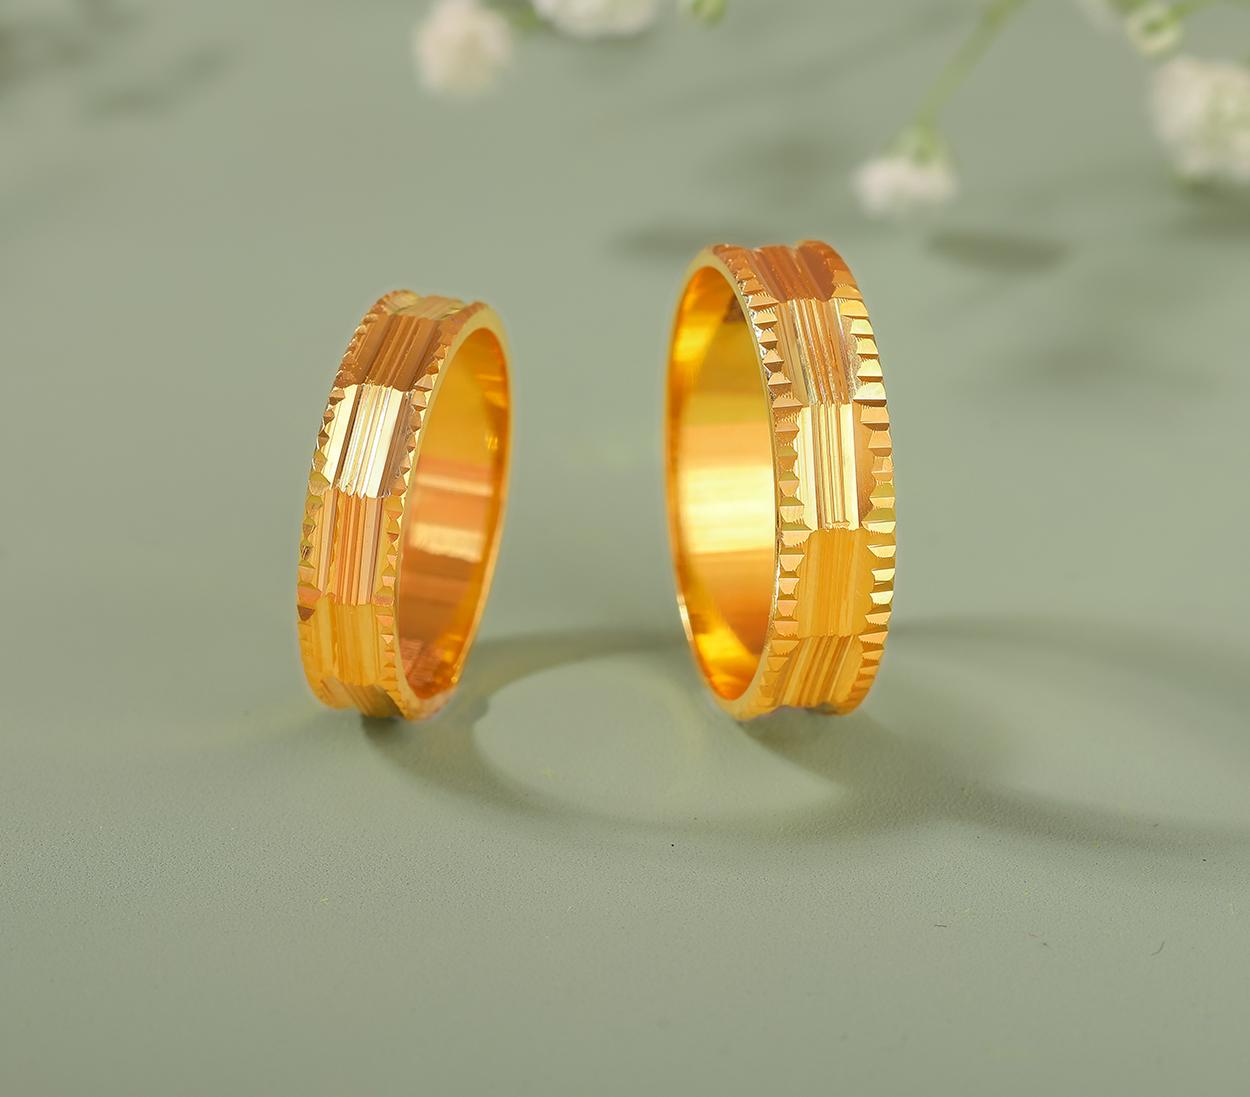 South Indian Jewellery now buy Online Stylish Plain Gold Finger Ring For Men